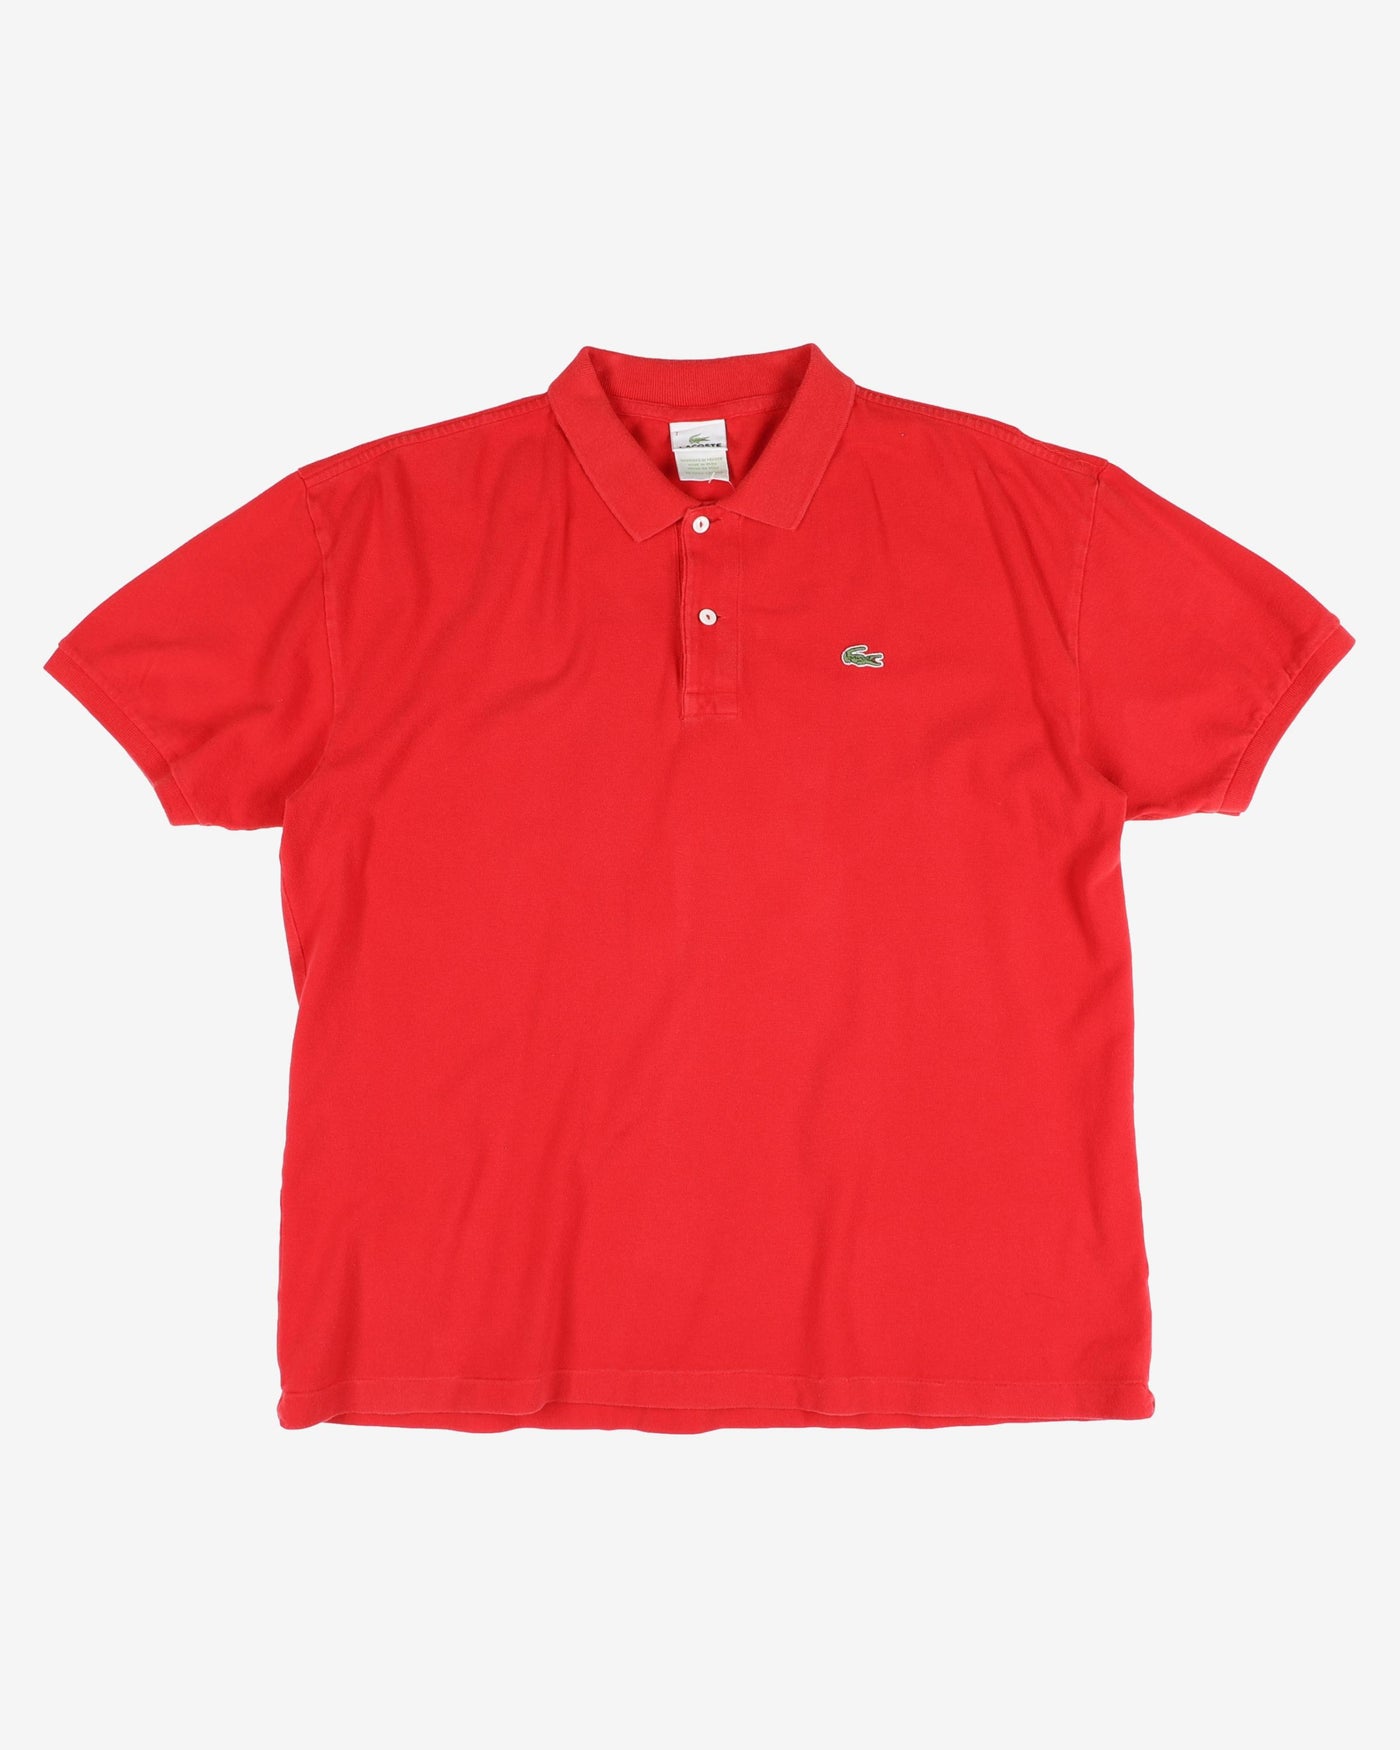 Red Chemise Lacoste Logo Polo Shirt - XL